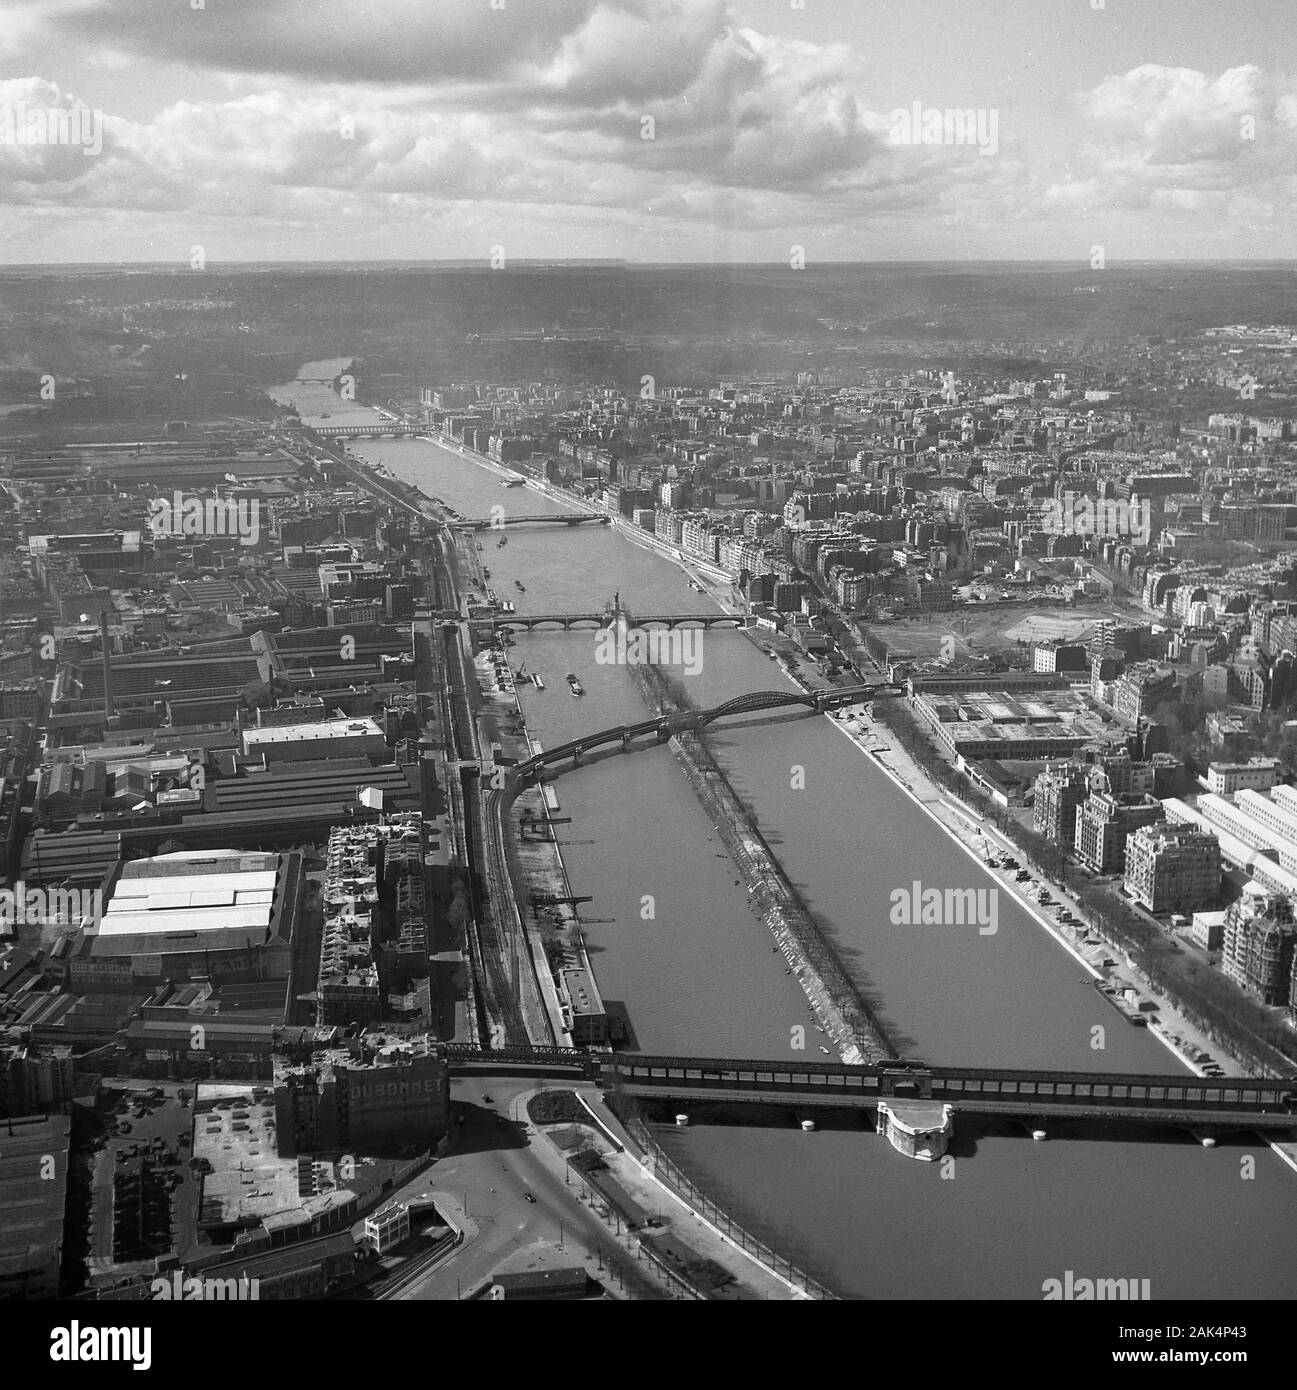 1950s, historical, aerial view from the Eiffel Tower over the river Seine and the city of Paris, France, showing the bridges of the day, including the little 'Statue of Liberty' positioned on the ile aux Cygnes (Isle of the Swans) in the middle of the river. Stock Photo